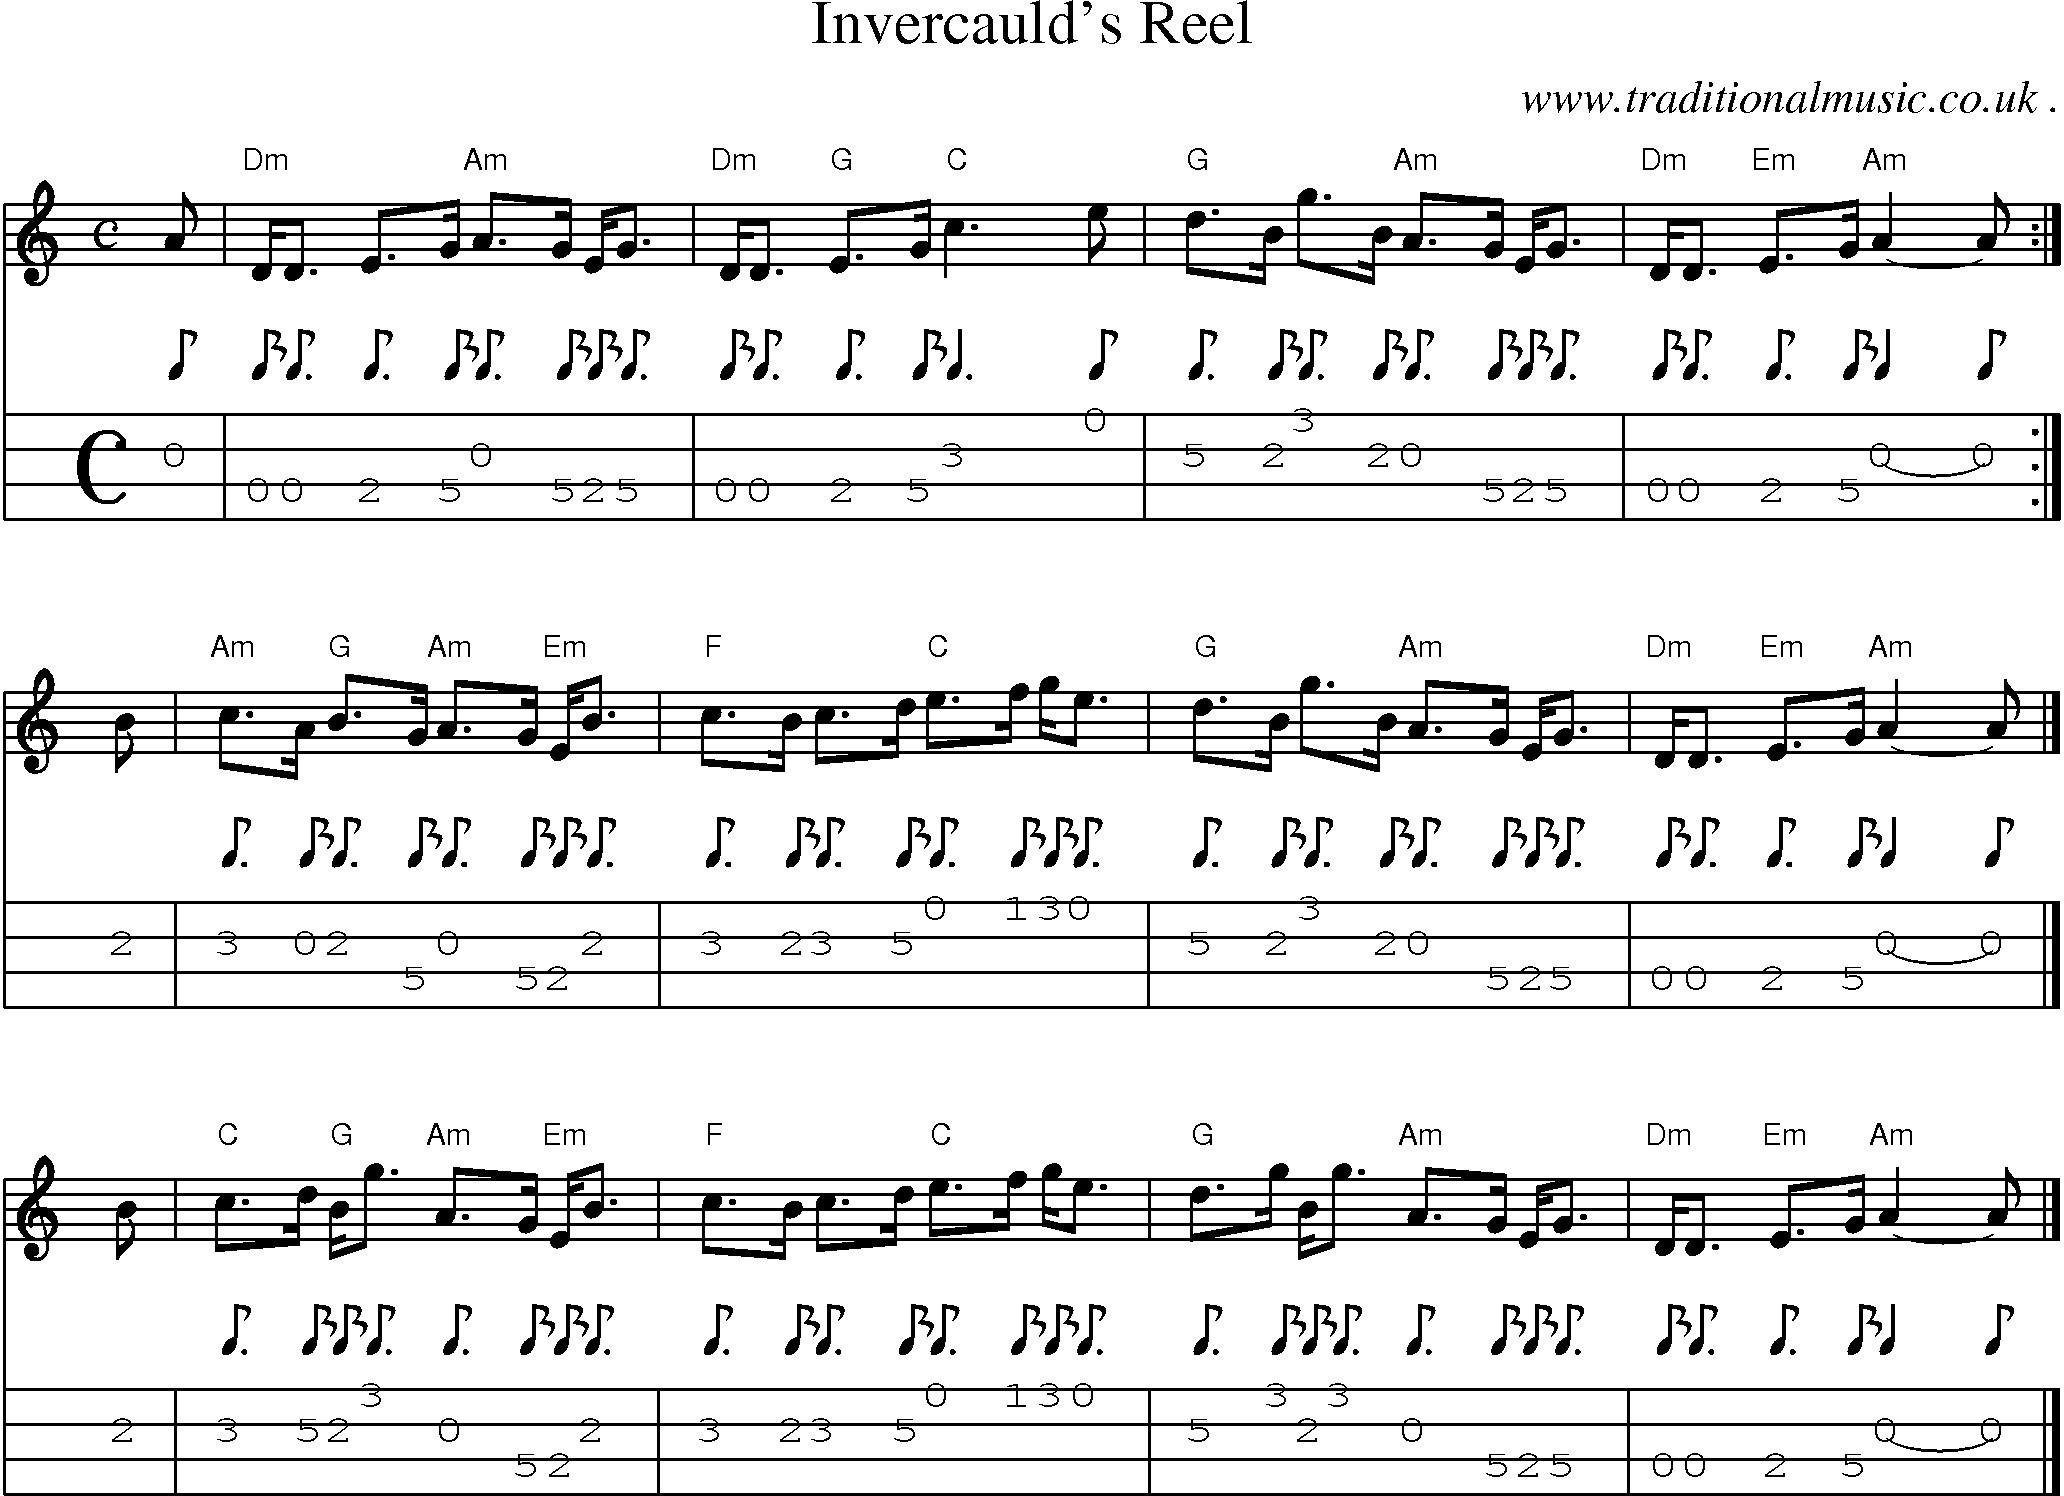 Sheet-music  score, Chords and Mandolin Tabs for Invercaulds Reel